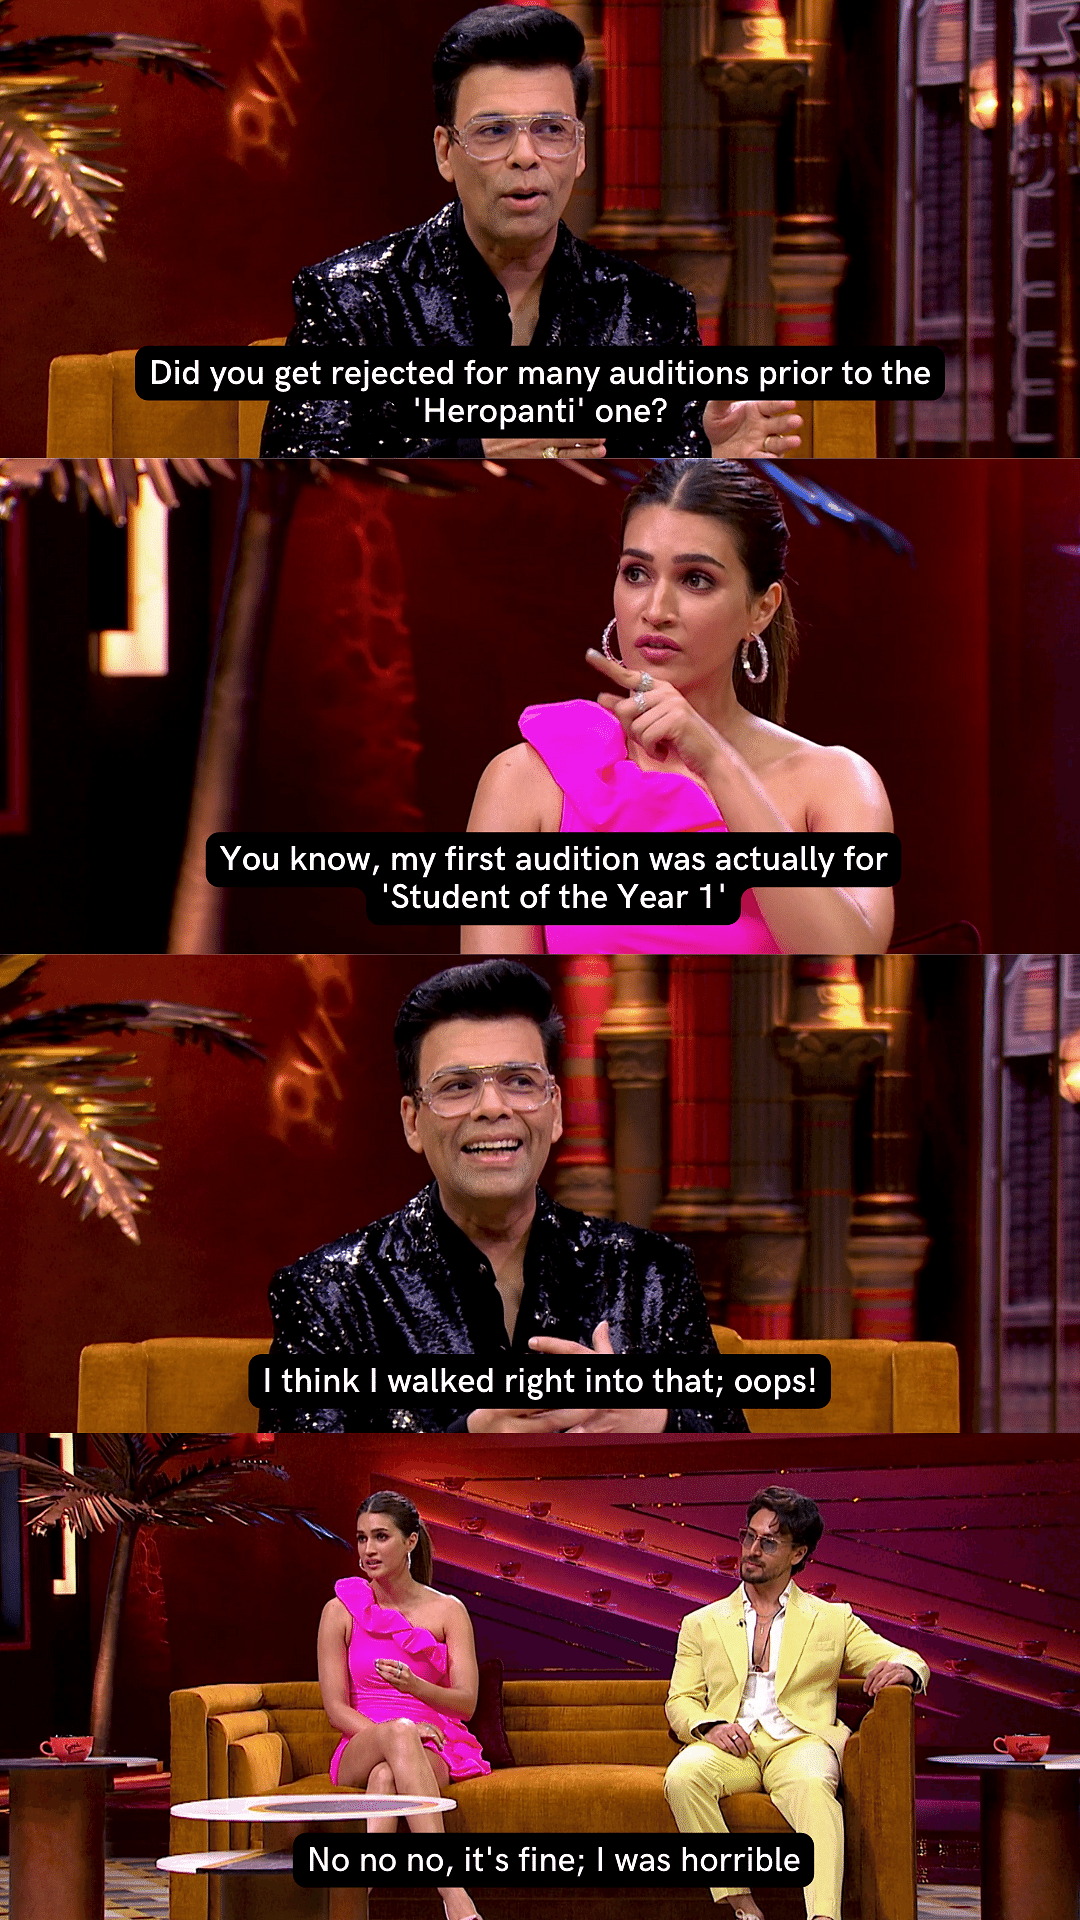 Karan Johar and Kriti Sanon's talking about Student of the Year and Lust Stories were intresting to say the least.